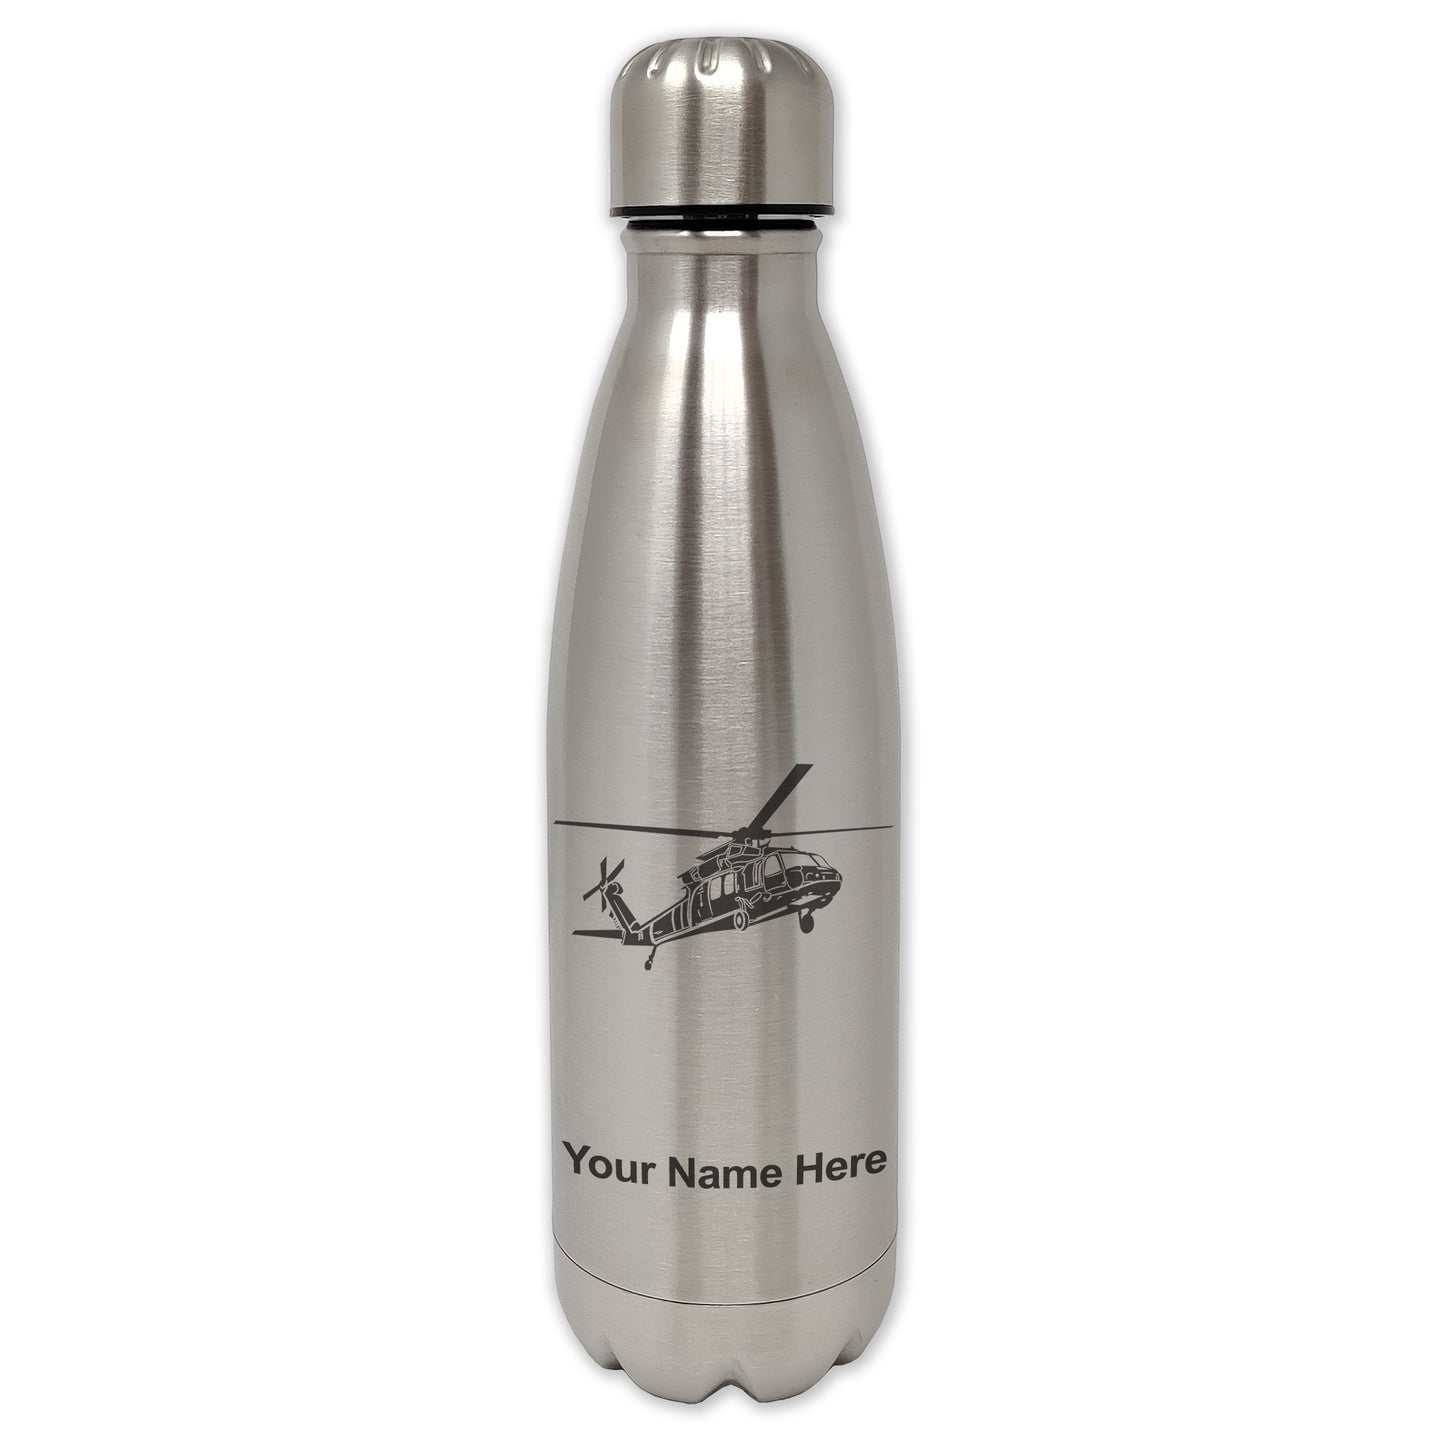 LaserGram Single Wall Water Bottle, Military Helicopter 1, Personalized Engraving Included